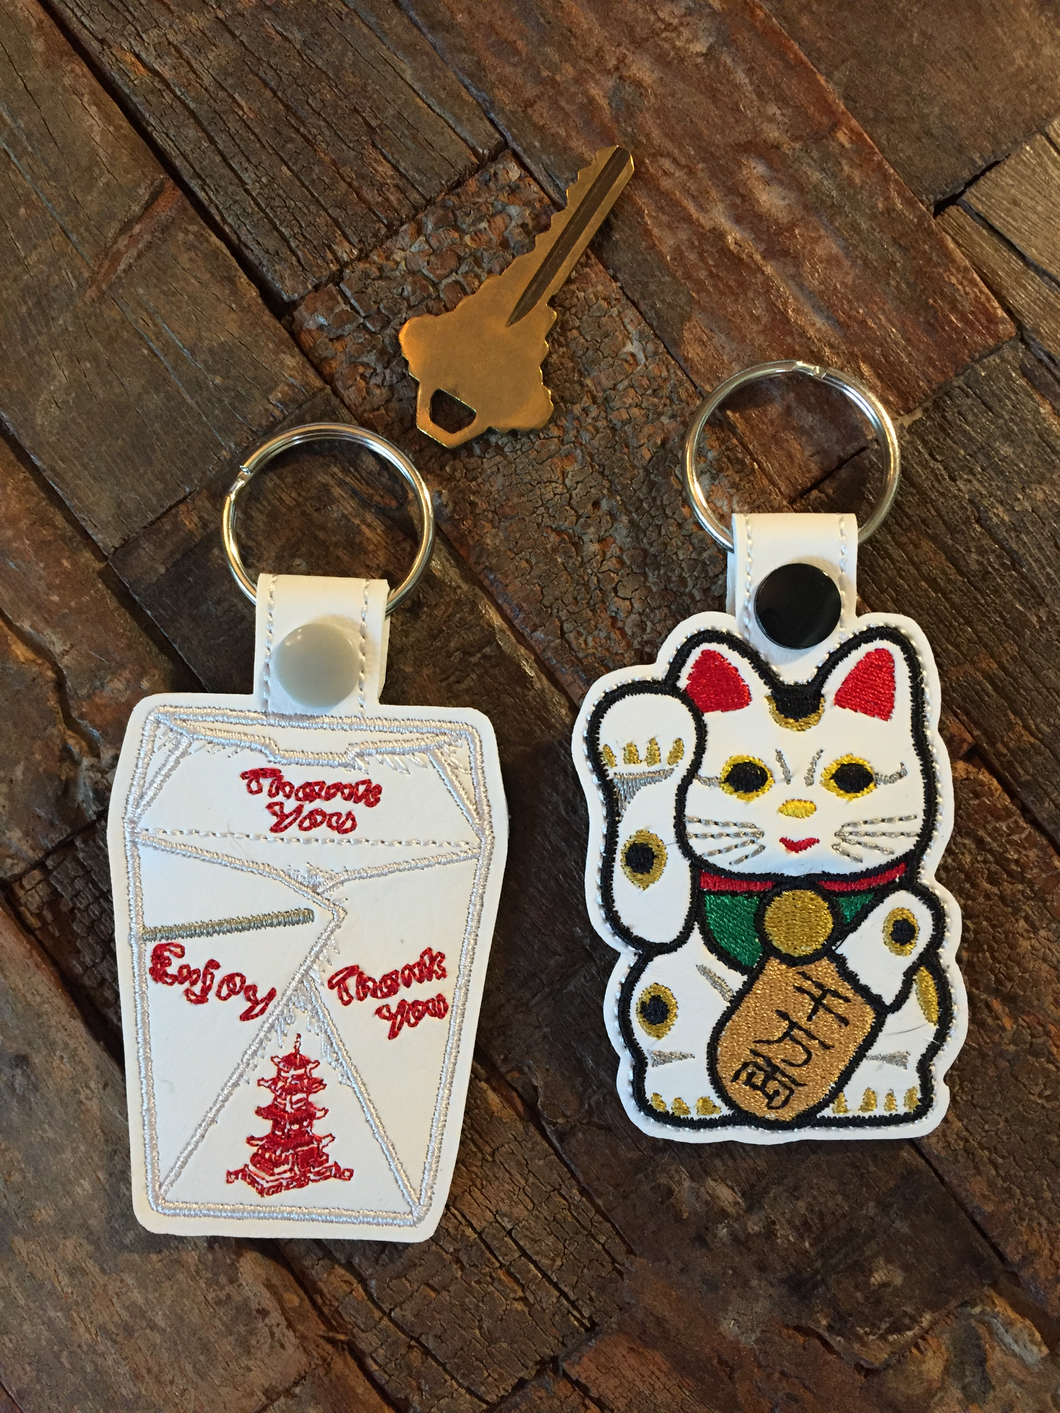 Key Fobs Inspired By A Fortunate Kitty Cat & Chinese Take Out - Keychains - Backpack Decoration - Bag Bling